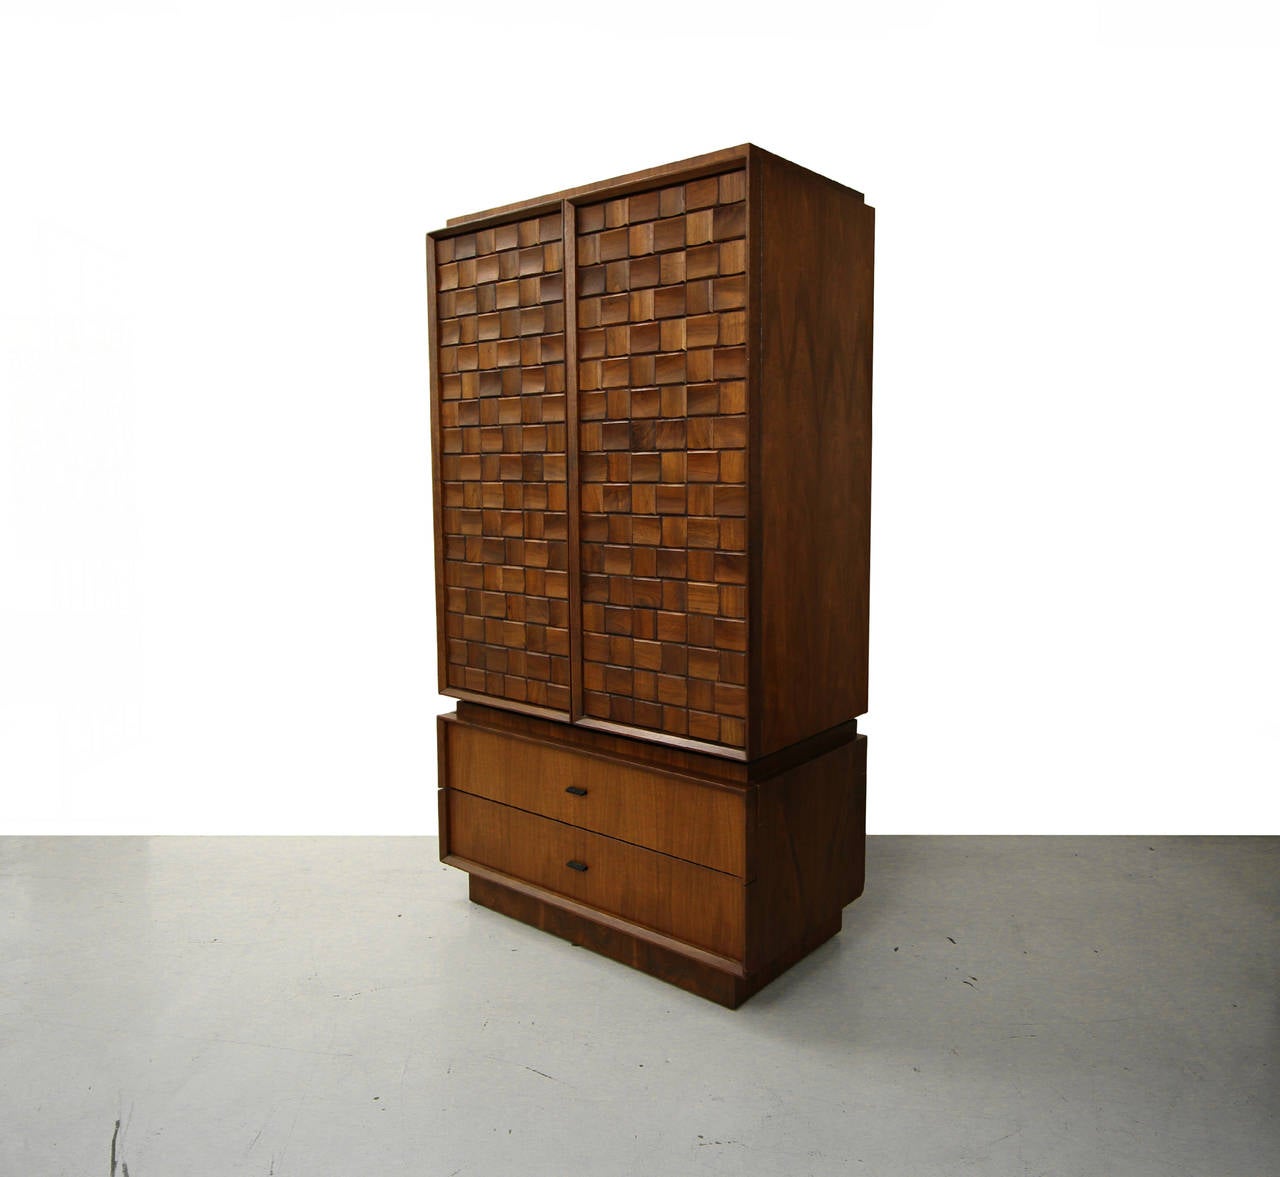 Beautiful walnut armoire style dresser piece, made in Canada.  Front is constructed of alternating sculptural blocks creating a dimensional pattern that is truly unique.  Unit is 2 separate pieces.  The top piece has two doors that conceal three